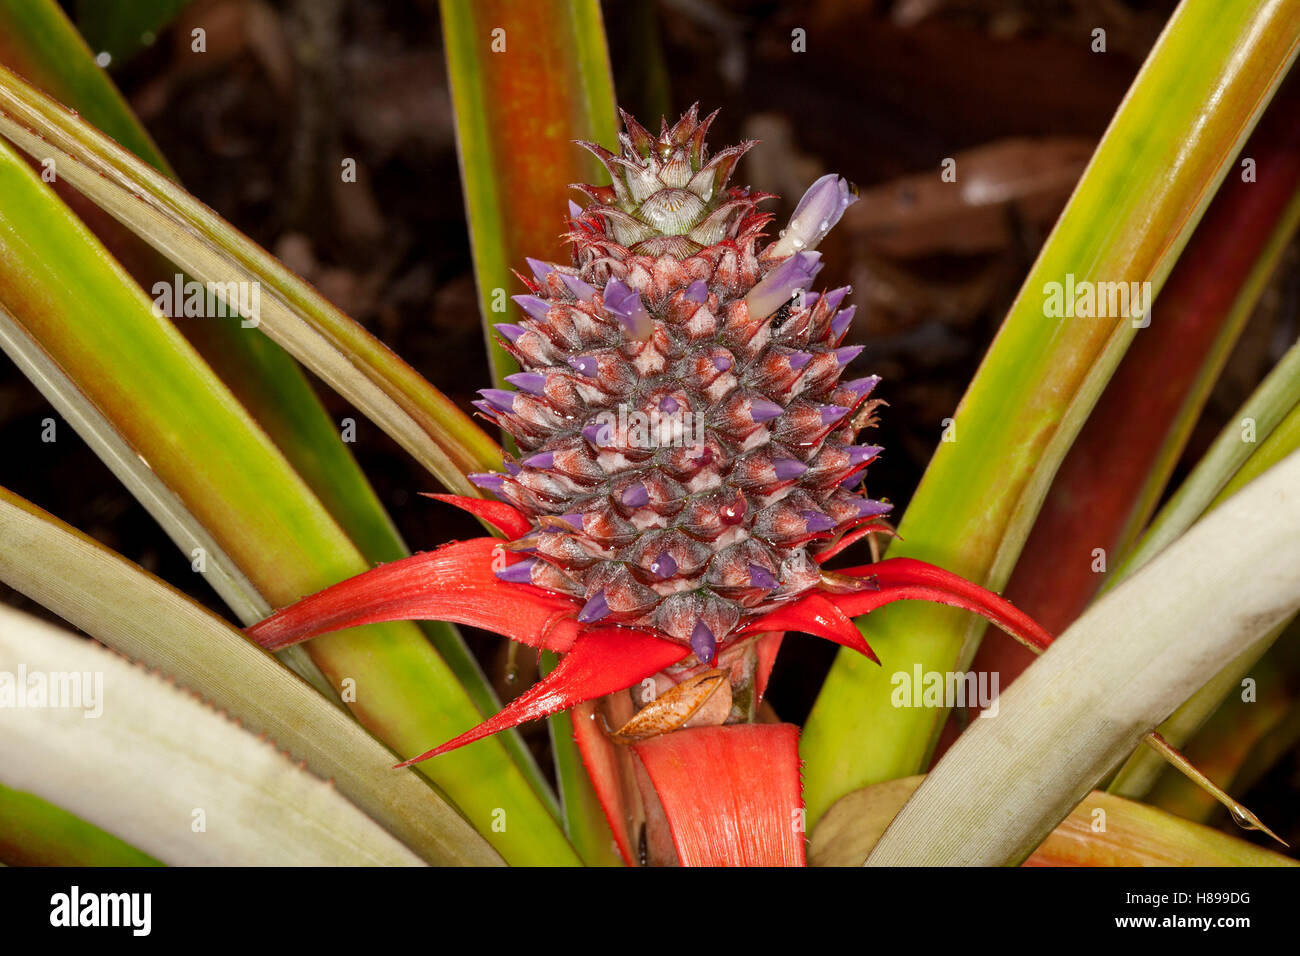 Pineapple, a bromeliad, with tiny mauve flowers, bright red bracts & spiny leaves growing in sub-tropical home garden in Queensland Australia Stock Photo